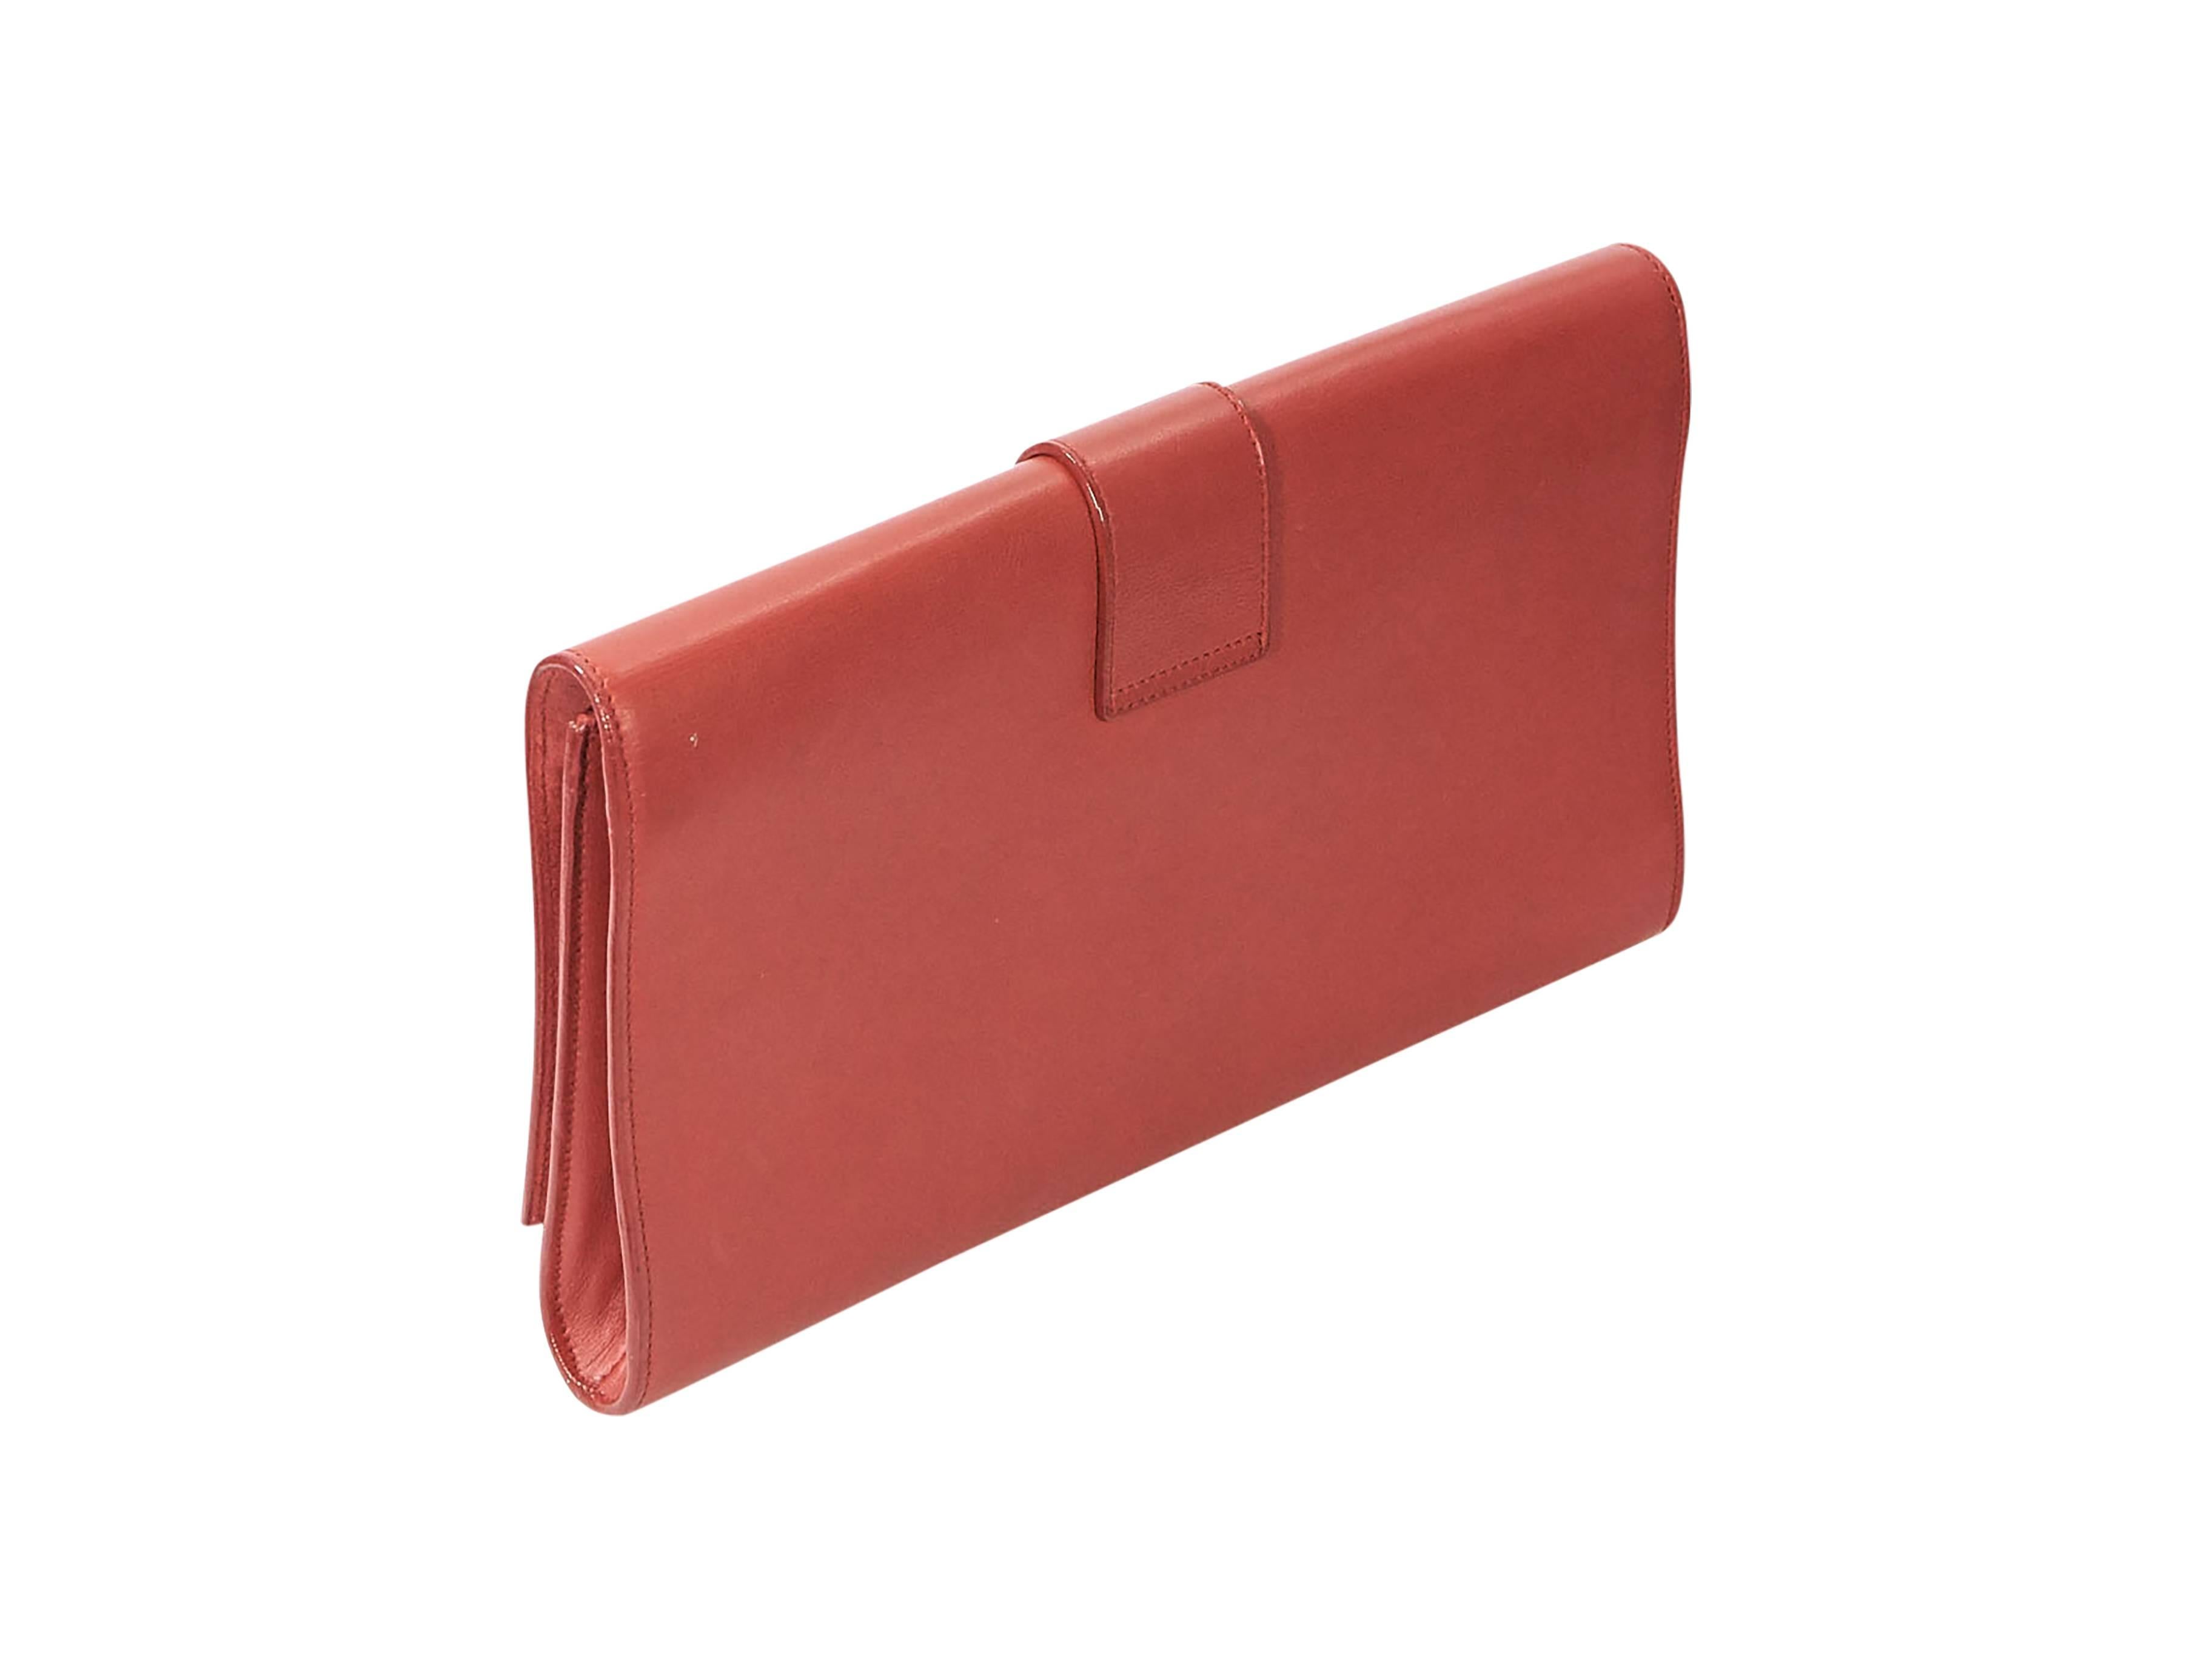 Product details: Red Chyc leather clutch by Yves Saint Laurent. Front flap with logo hardware. Magnetic snap closure. Suede lined interior with inner slide pocket. Goldtone hardware. 11.25